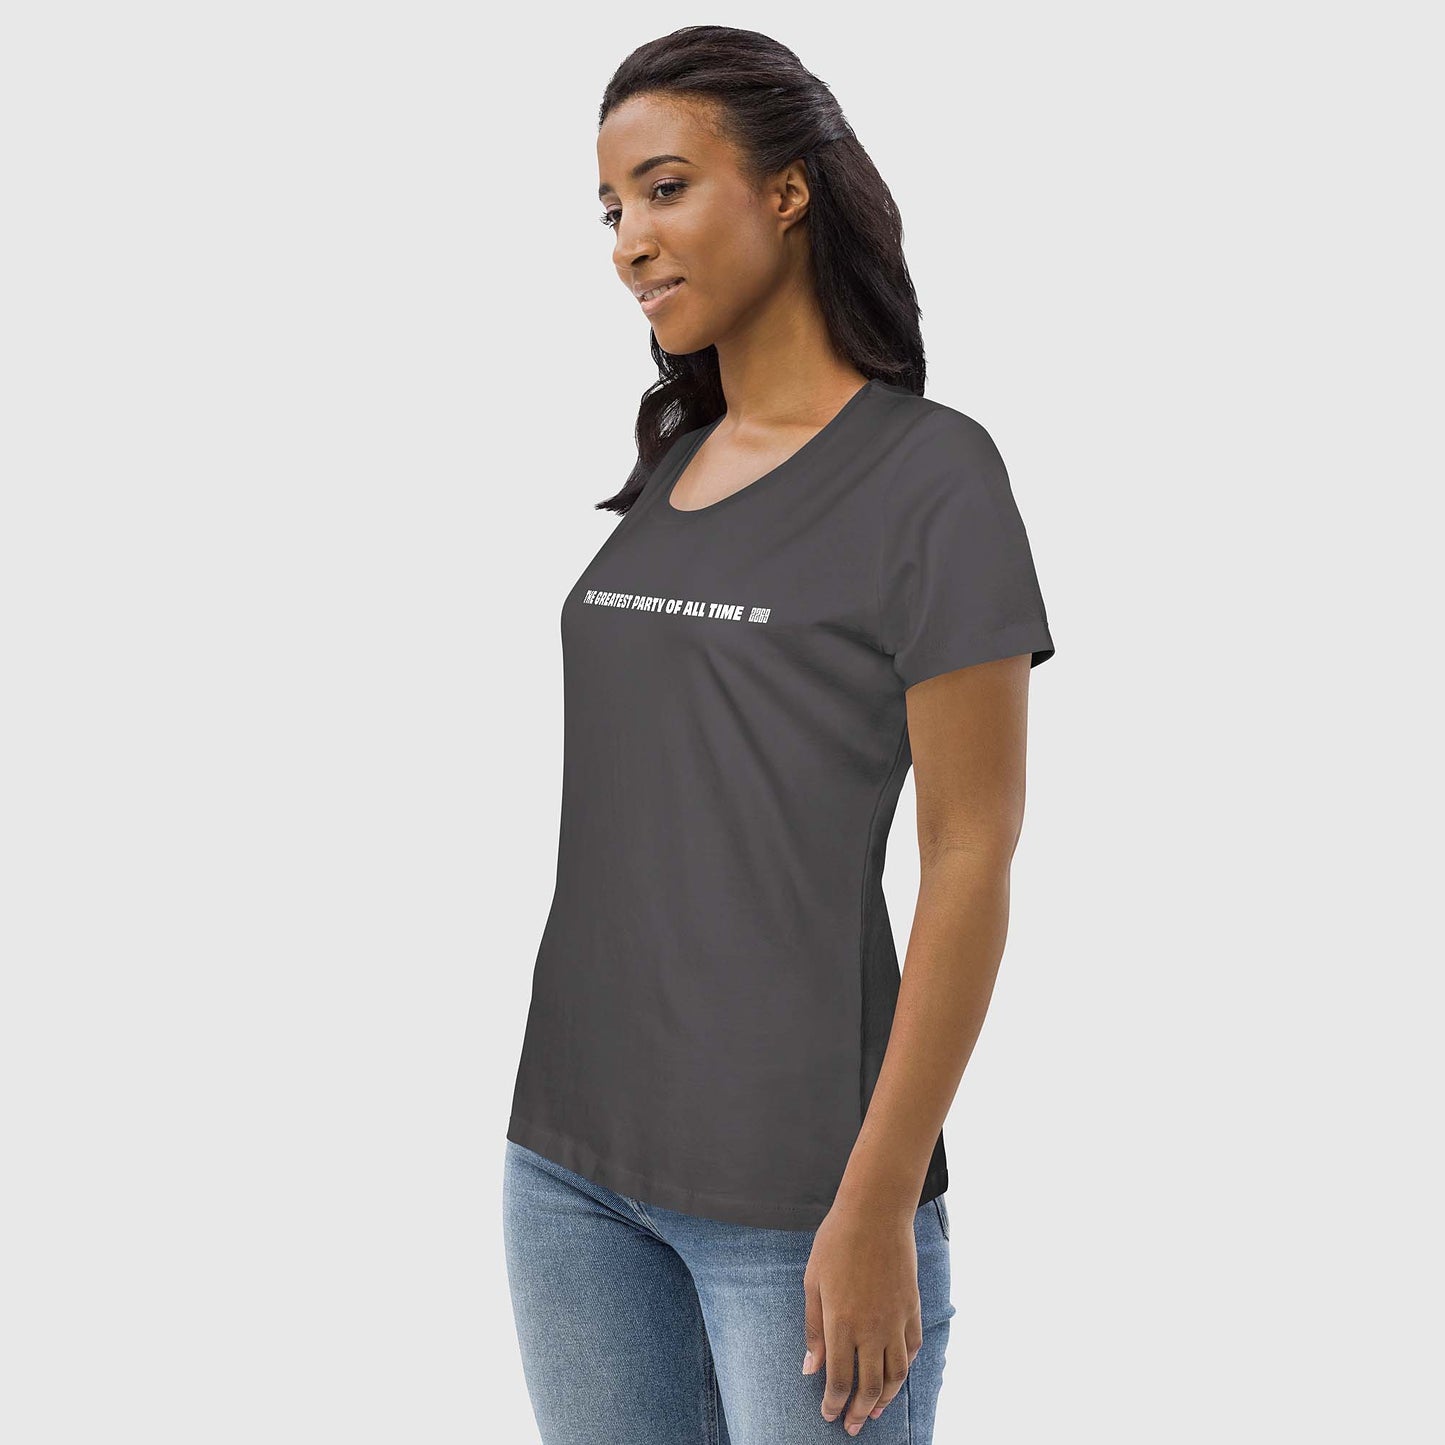 Women's anthracite fitted organic cotton t-shirt with English 2269 party message